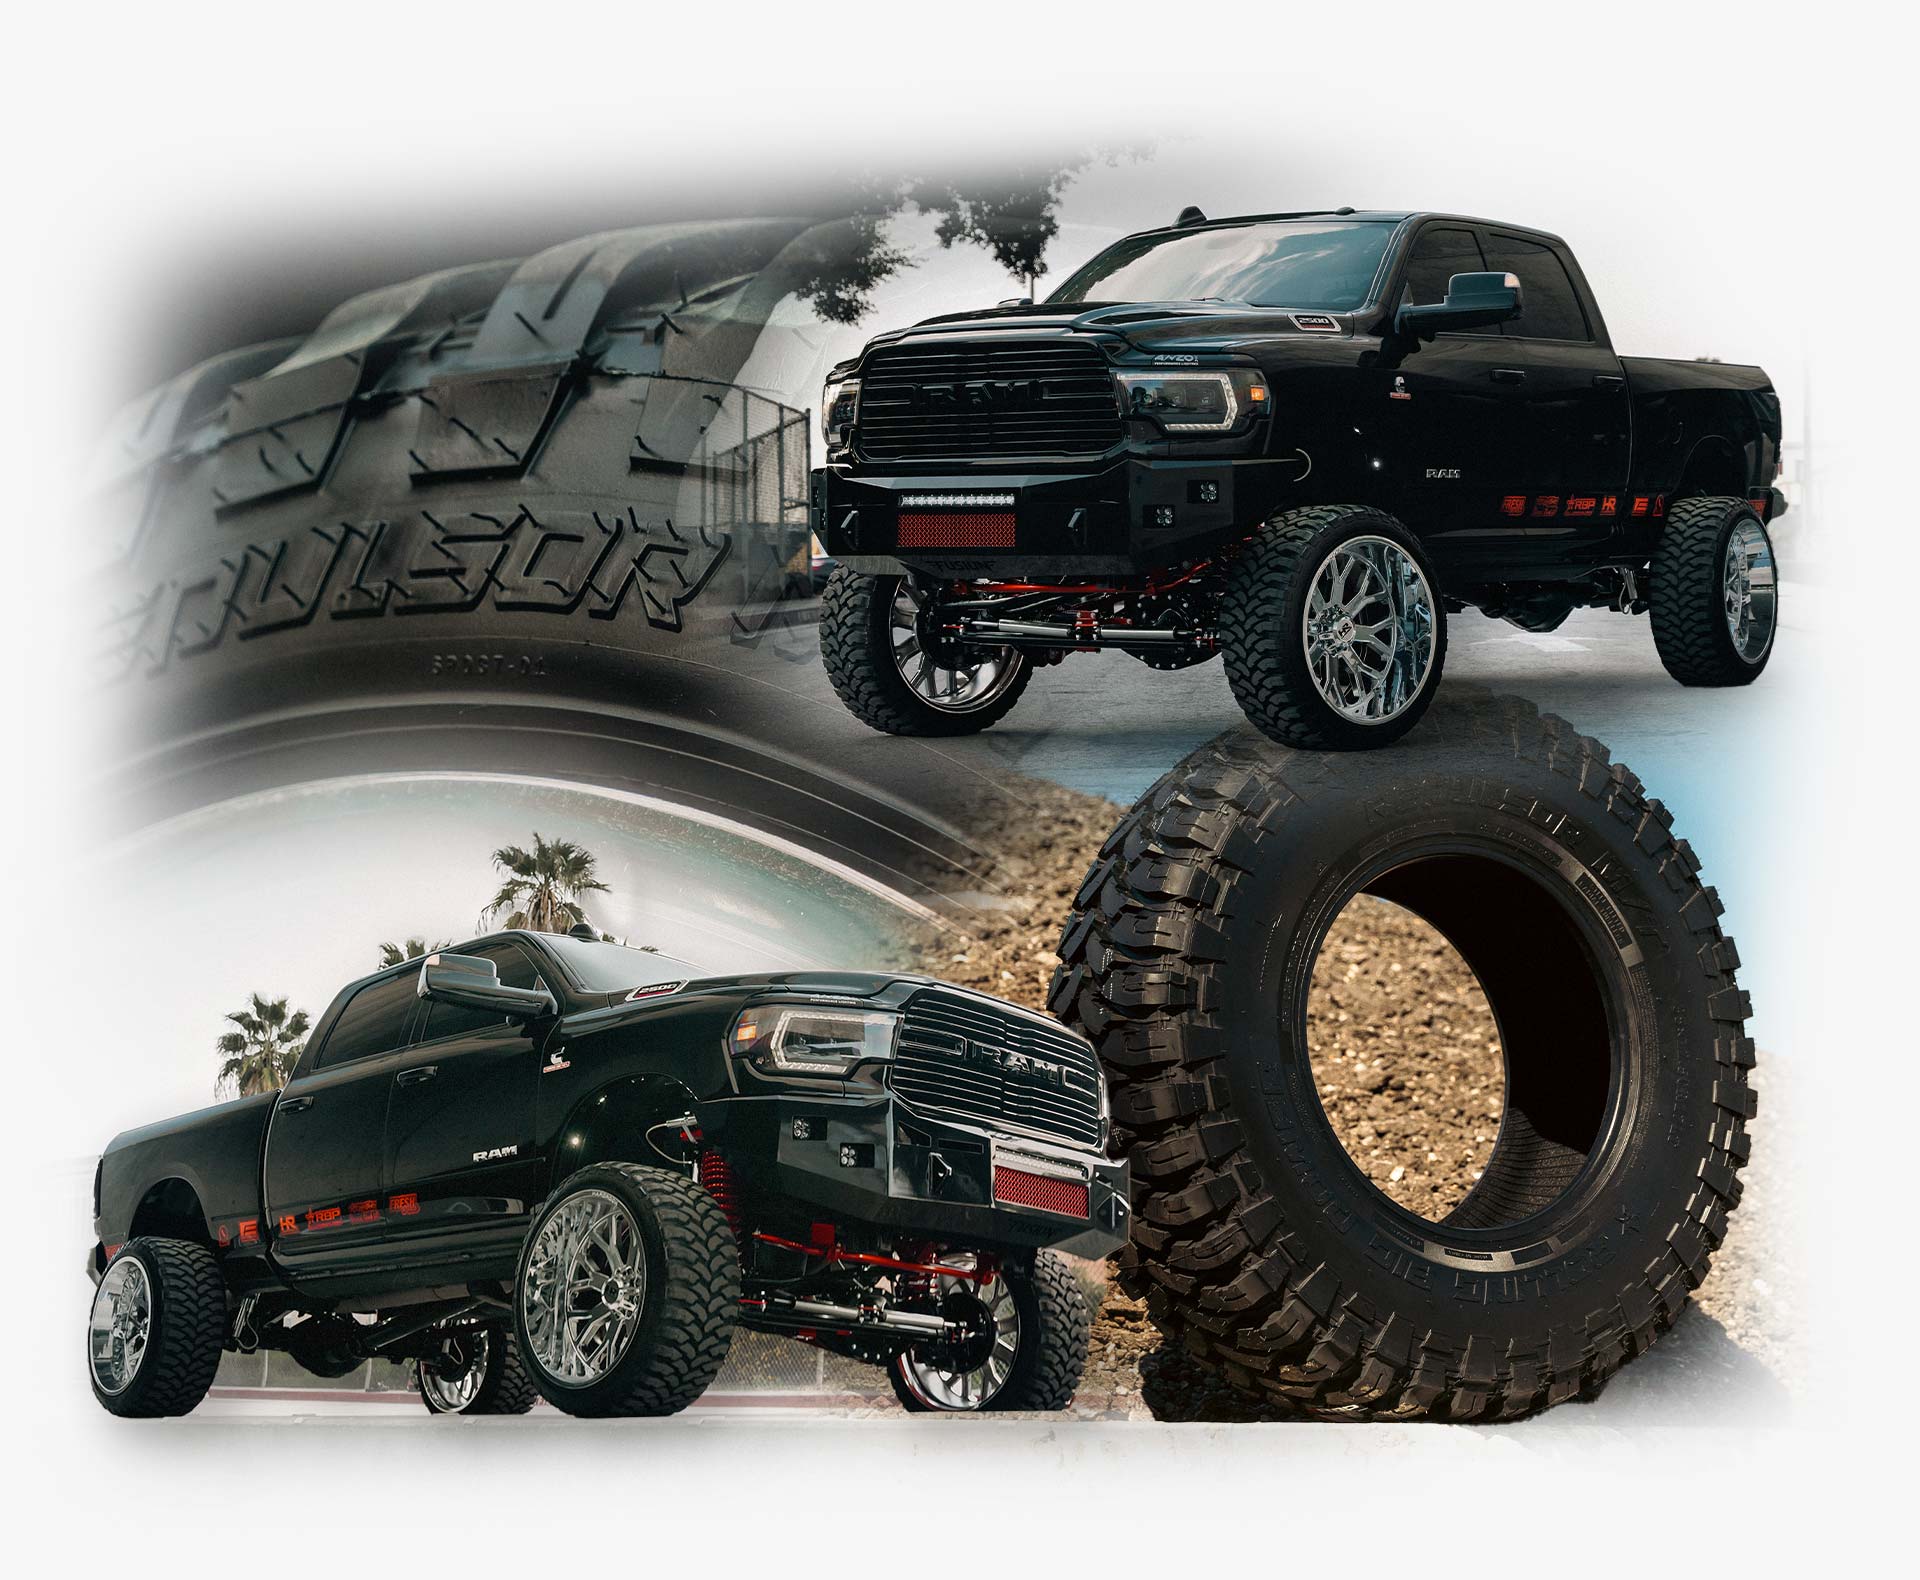 A graphic design image of RBP tires and a Dodge RAM 2500